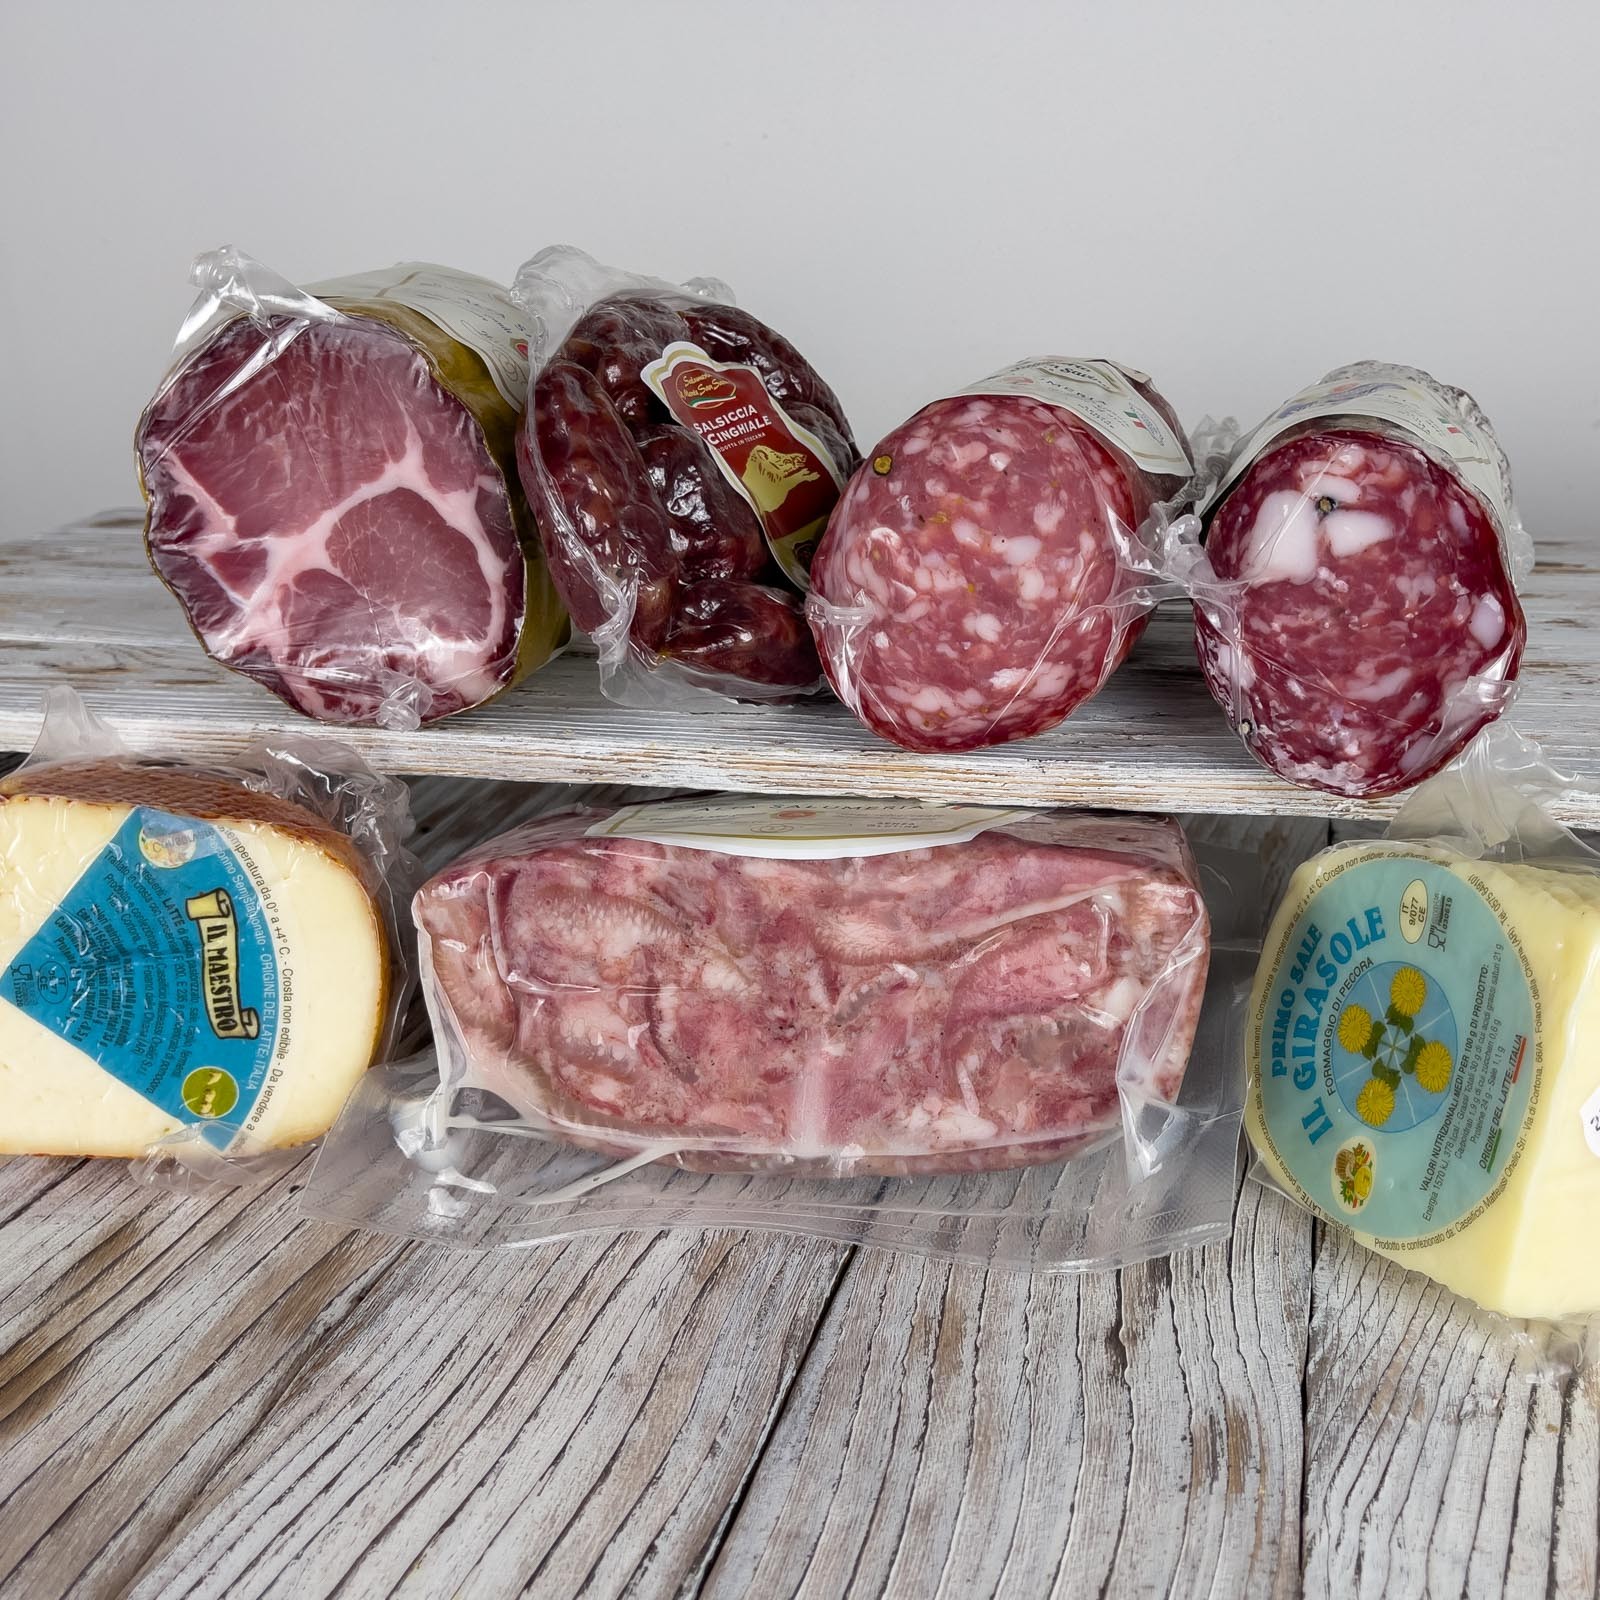 The Tasting Box - “Tagliere Raffinato” is made up of a selection of products for a total of about 3 kg. Perfect for preparing a huge platter of very particular and refined Tuscan cold cuts and cheeses.